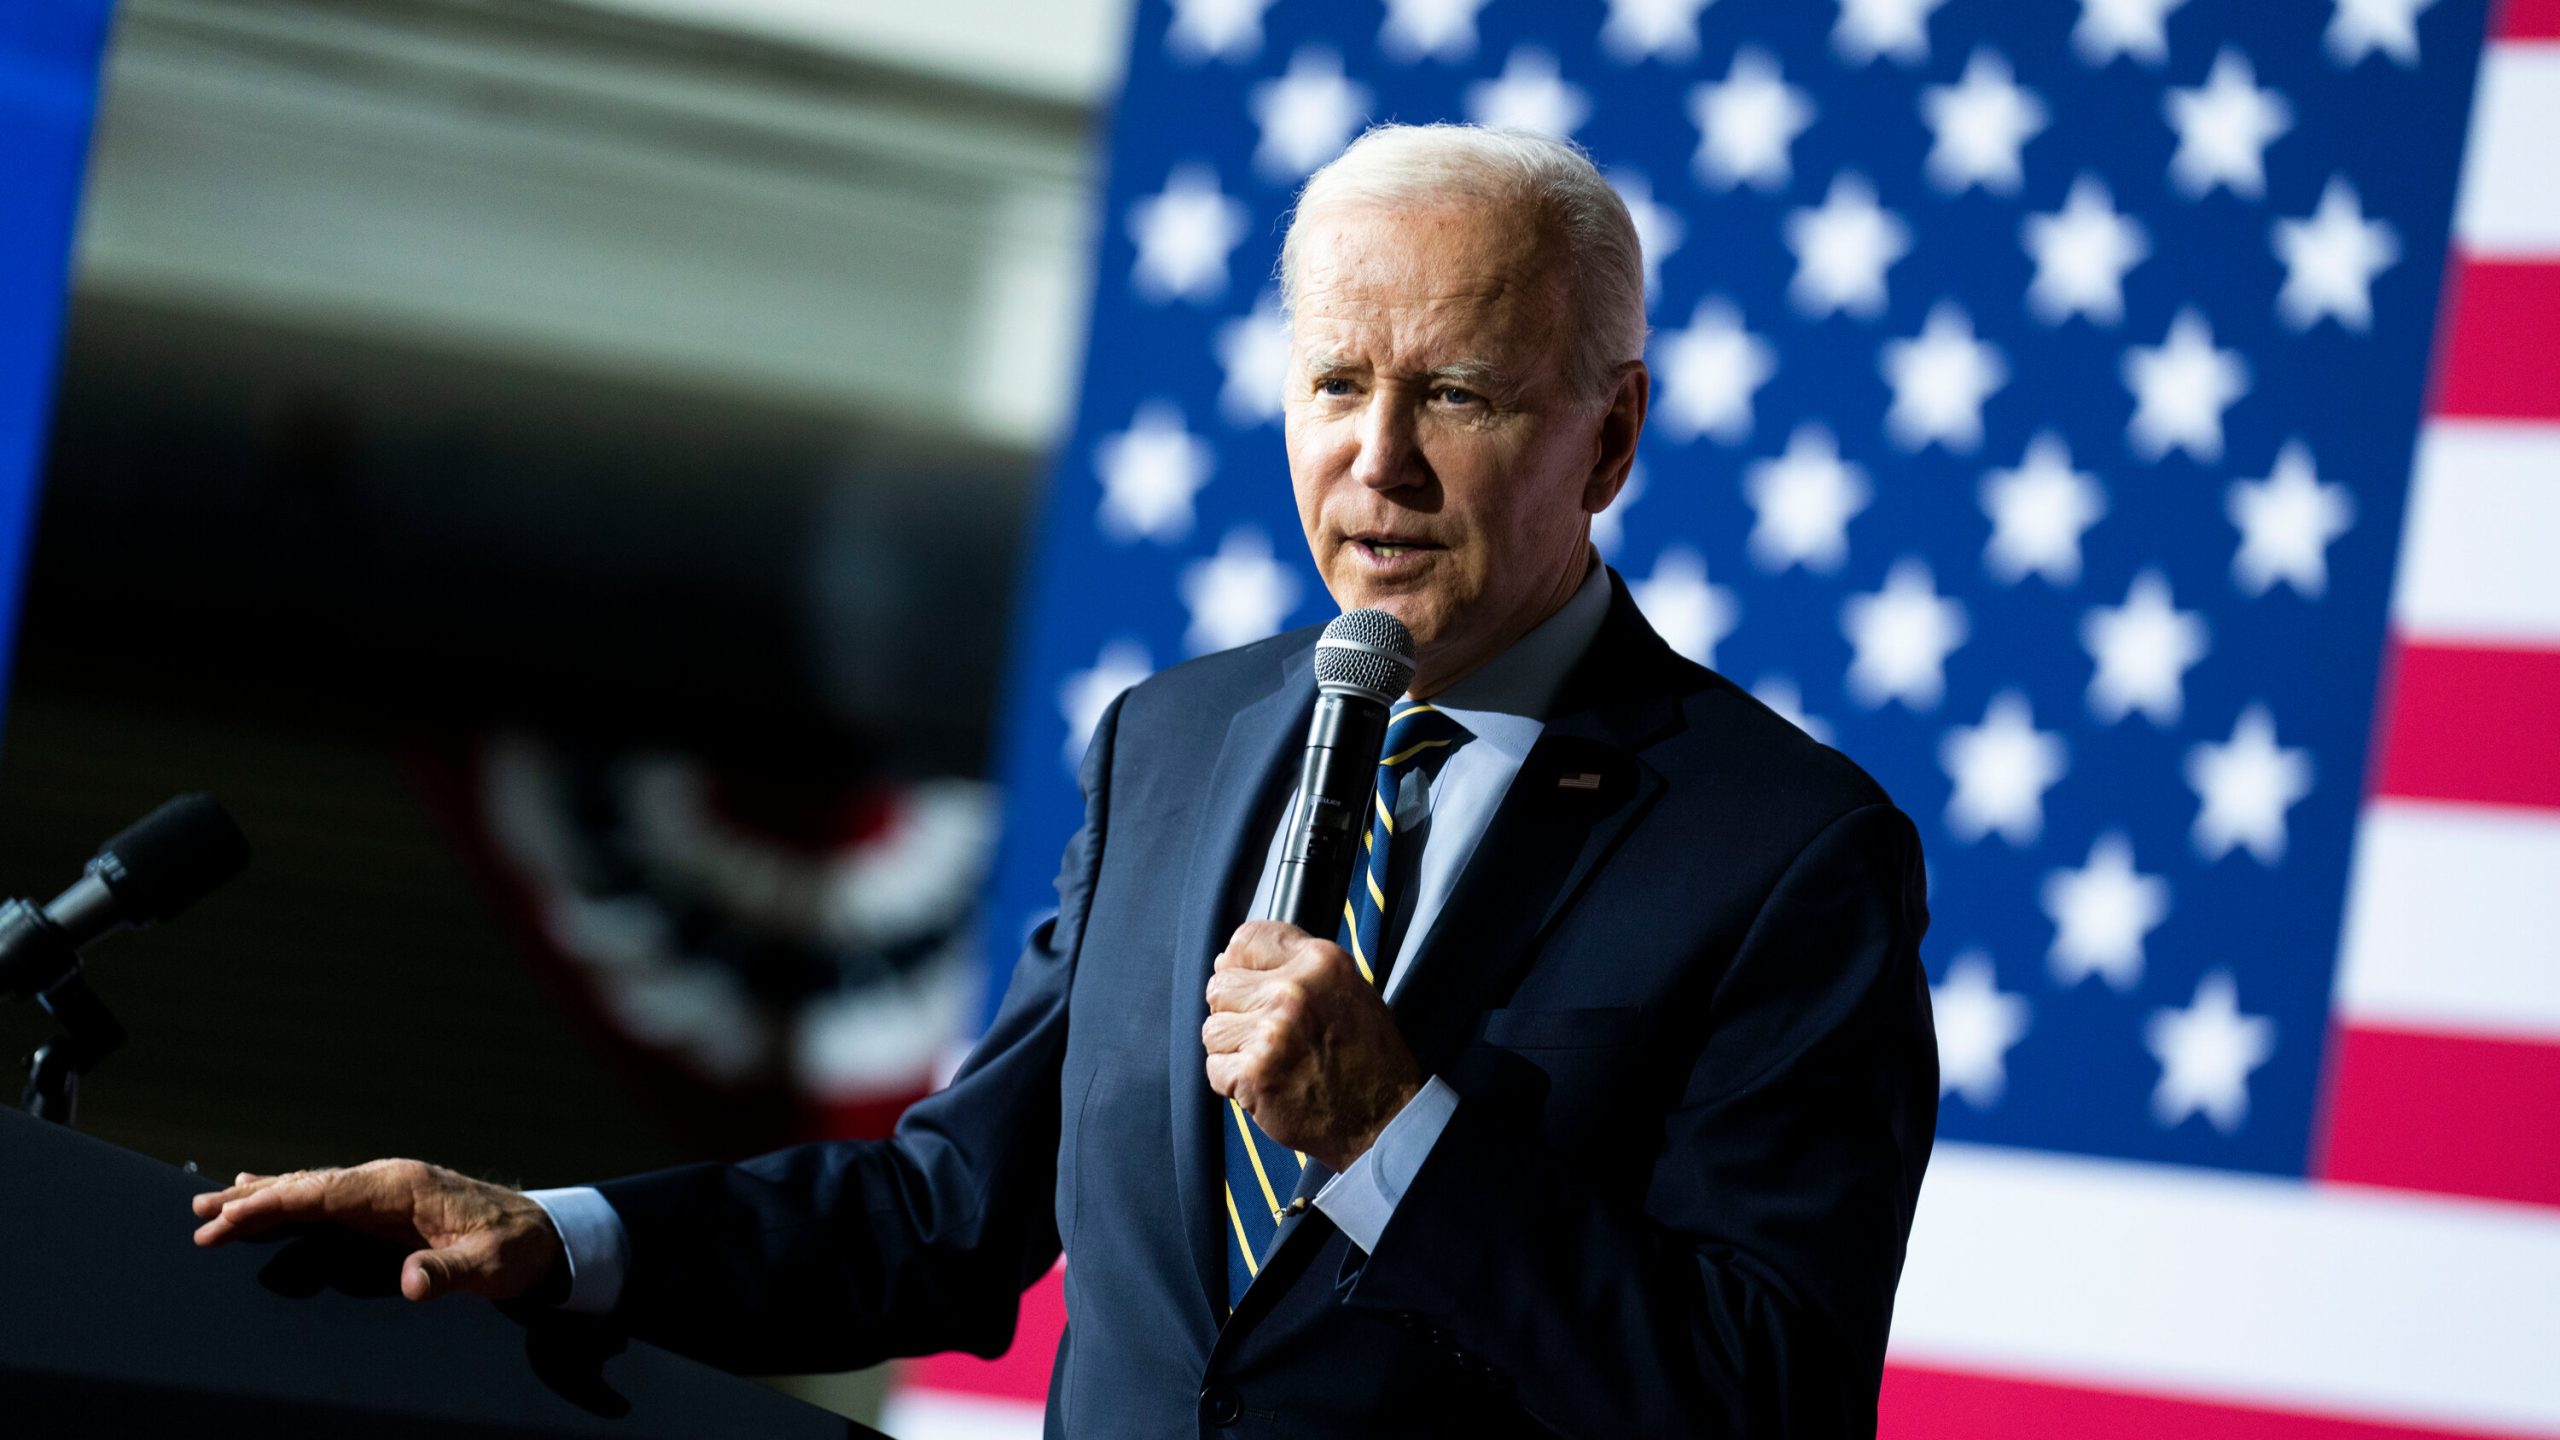 Biden vows to defend democracy (Credits: The NY Times)